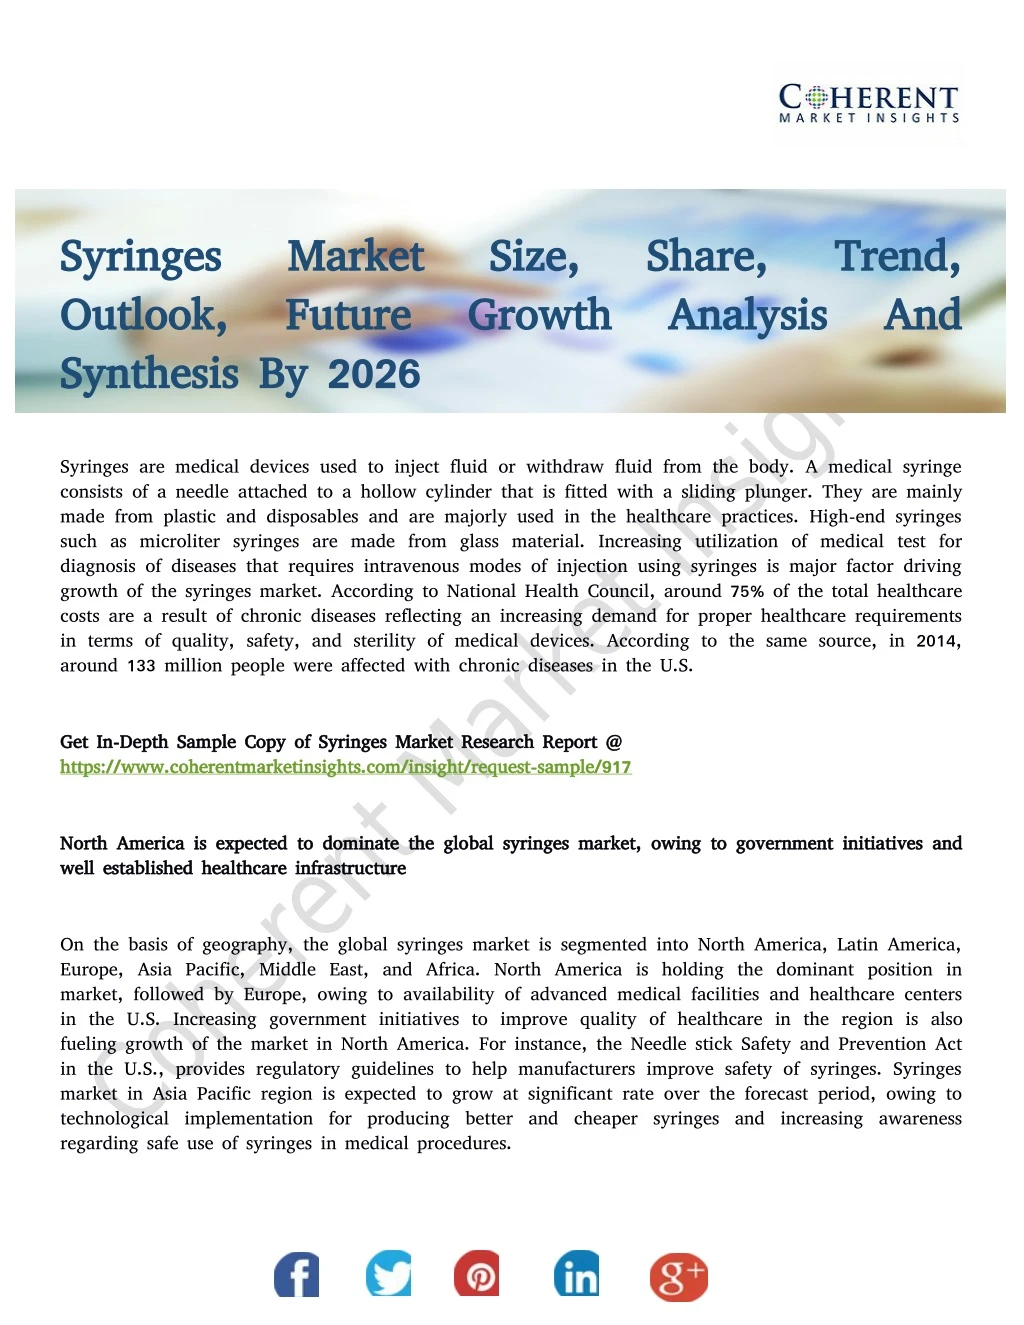 syringes syringes outlook future growth analysis